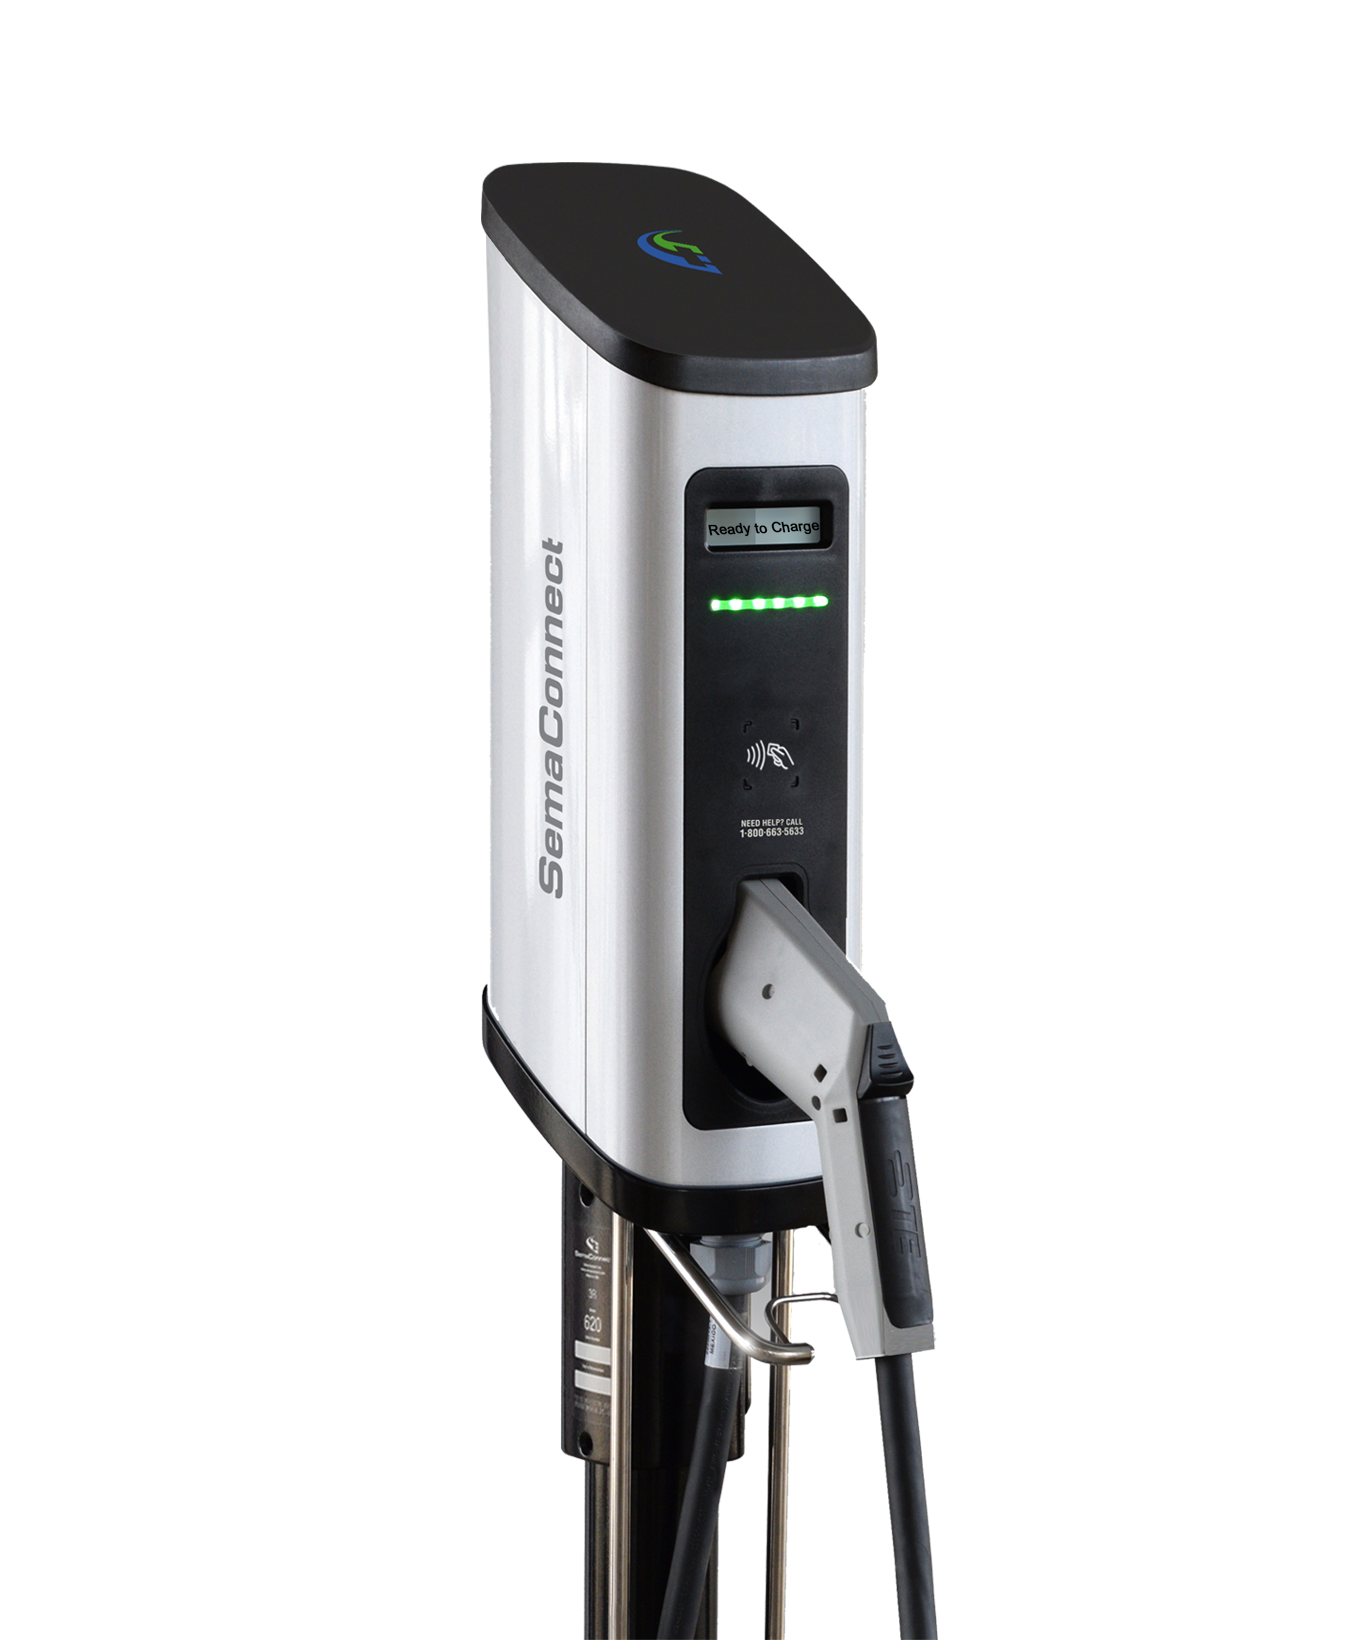 SemaConnect Announces the Smart Personal Charging Station